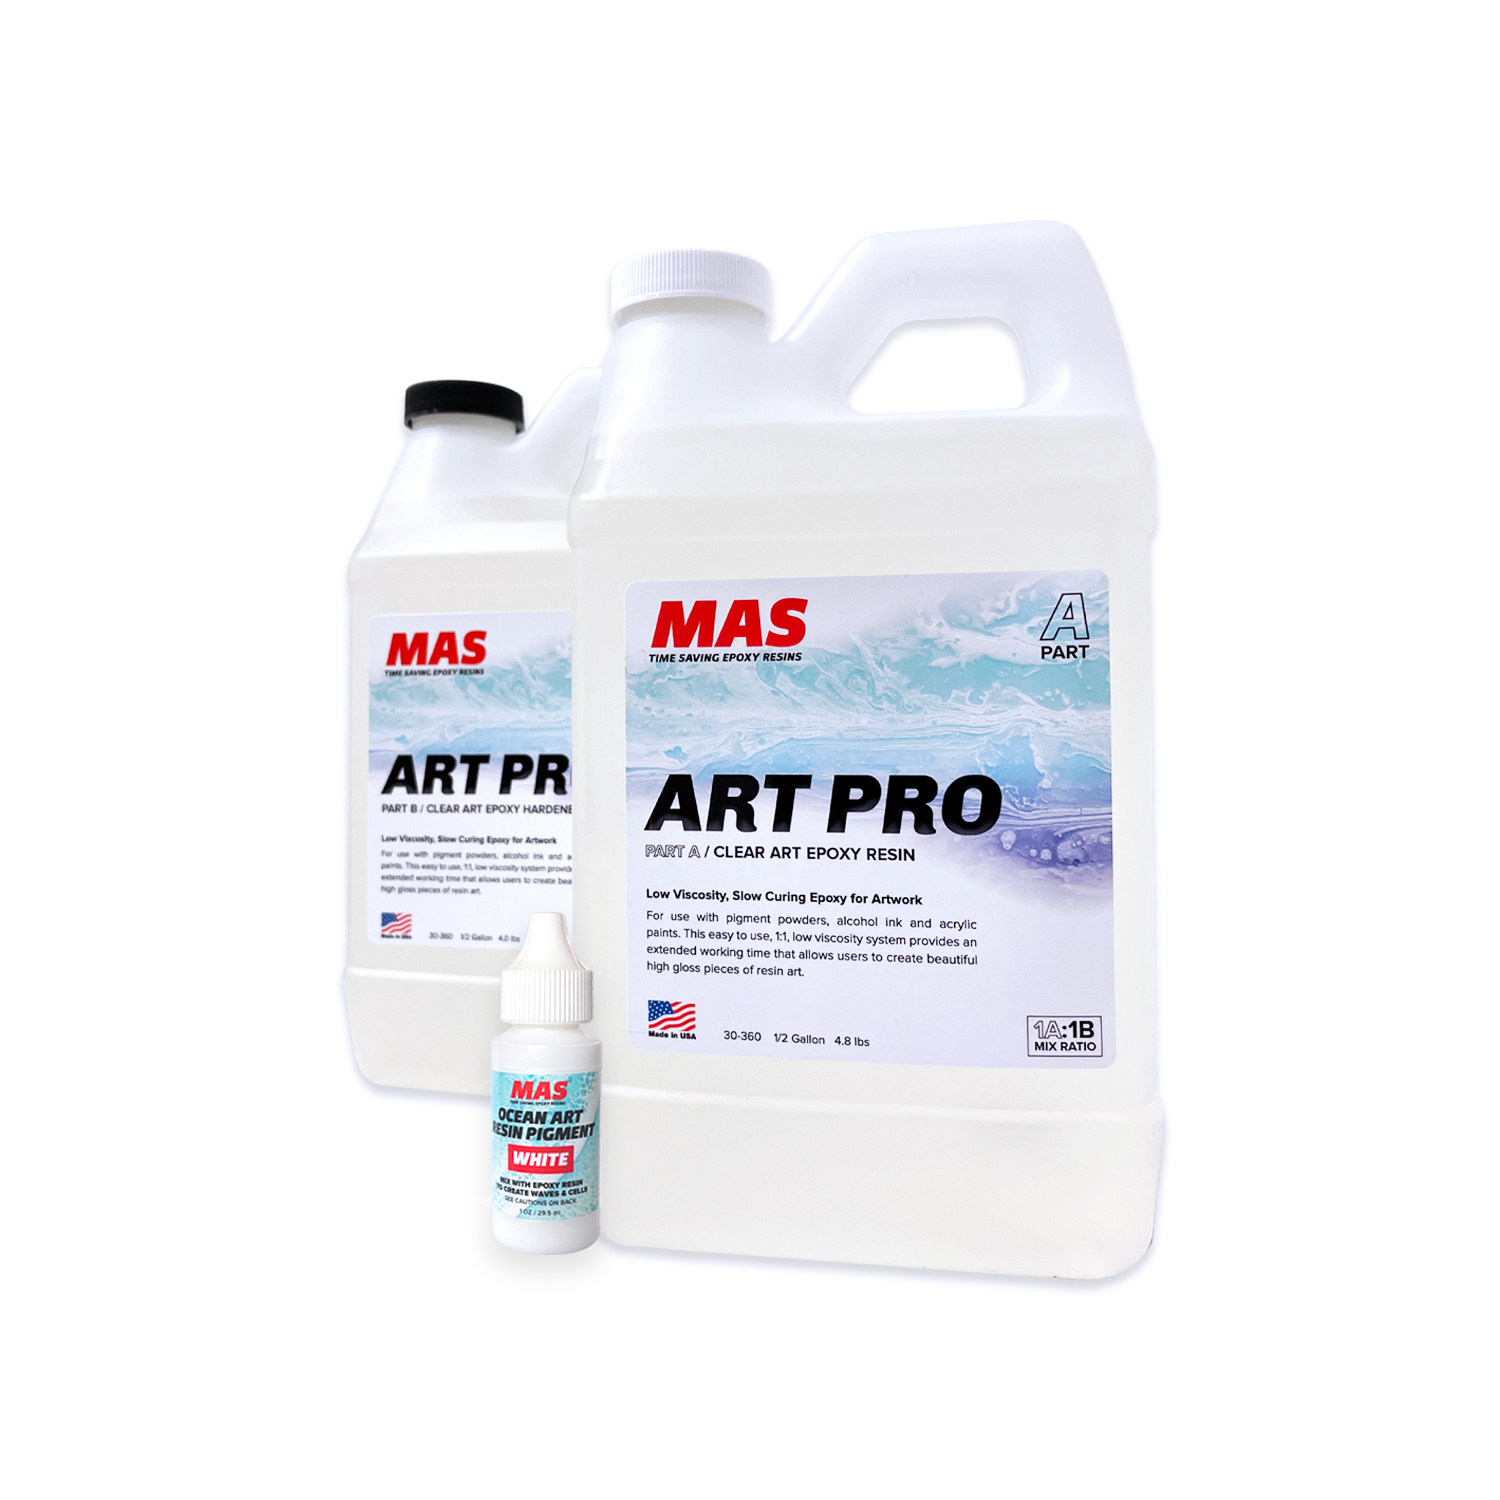 Art Pro 1 Gallon Resin Ocean Art with White Epoxy Pigment Bundle Questions & Answers